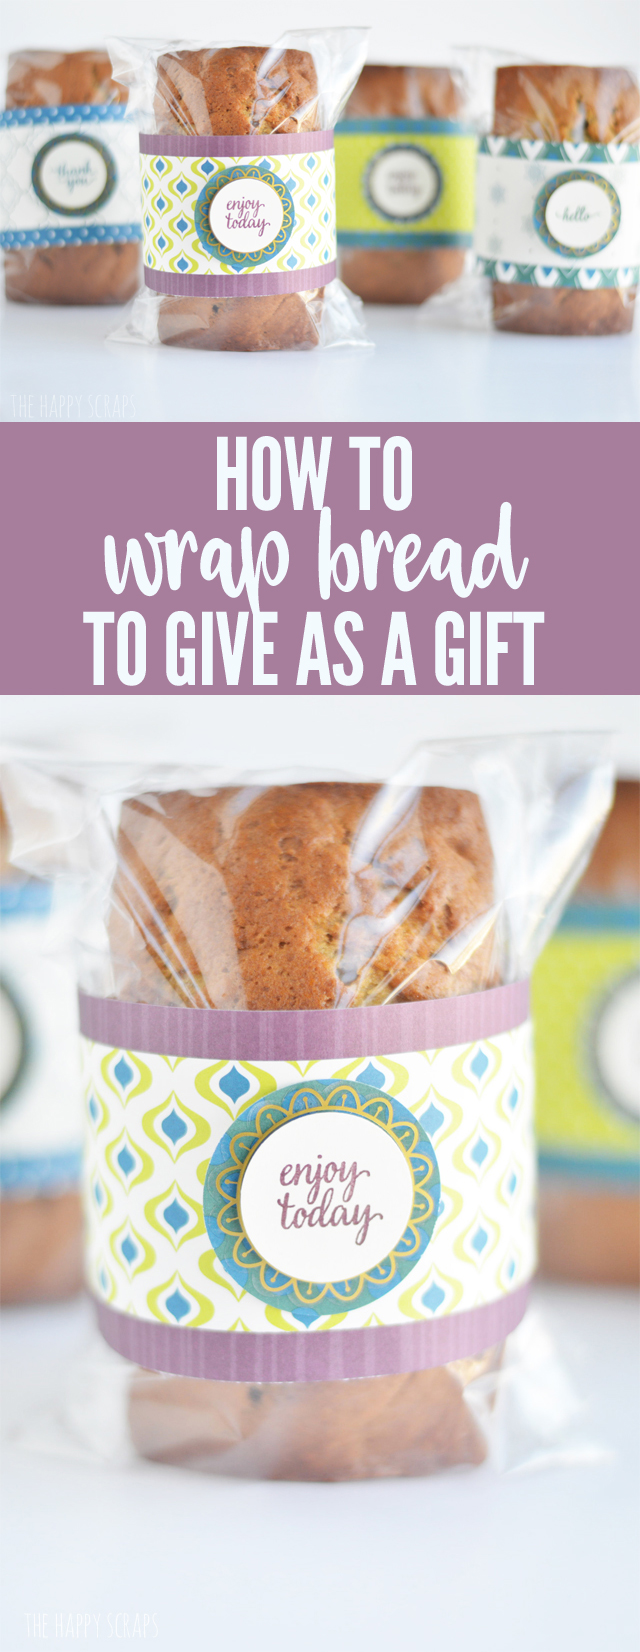 How to Wrap Bread to Give as a Gift. This is a great gift idea to let someone know you are thinking about them. They come together quick + easy too!